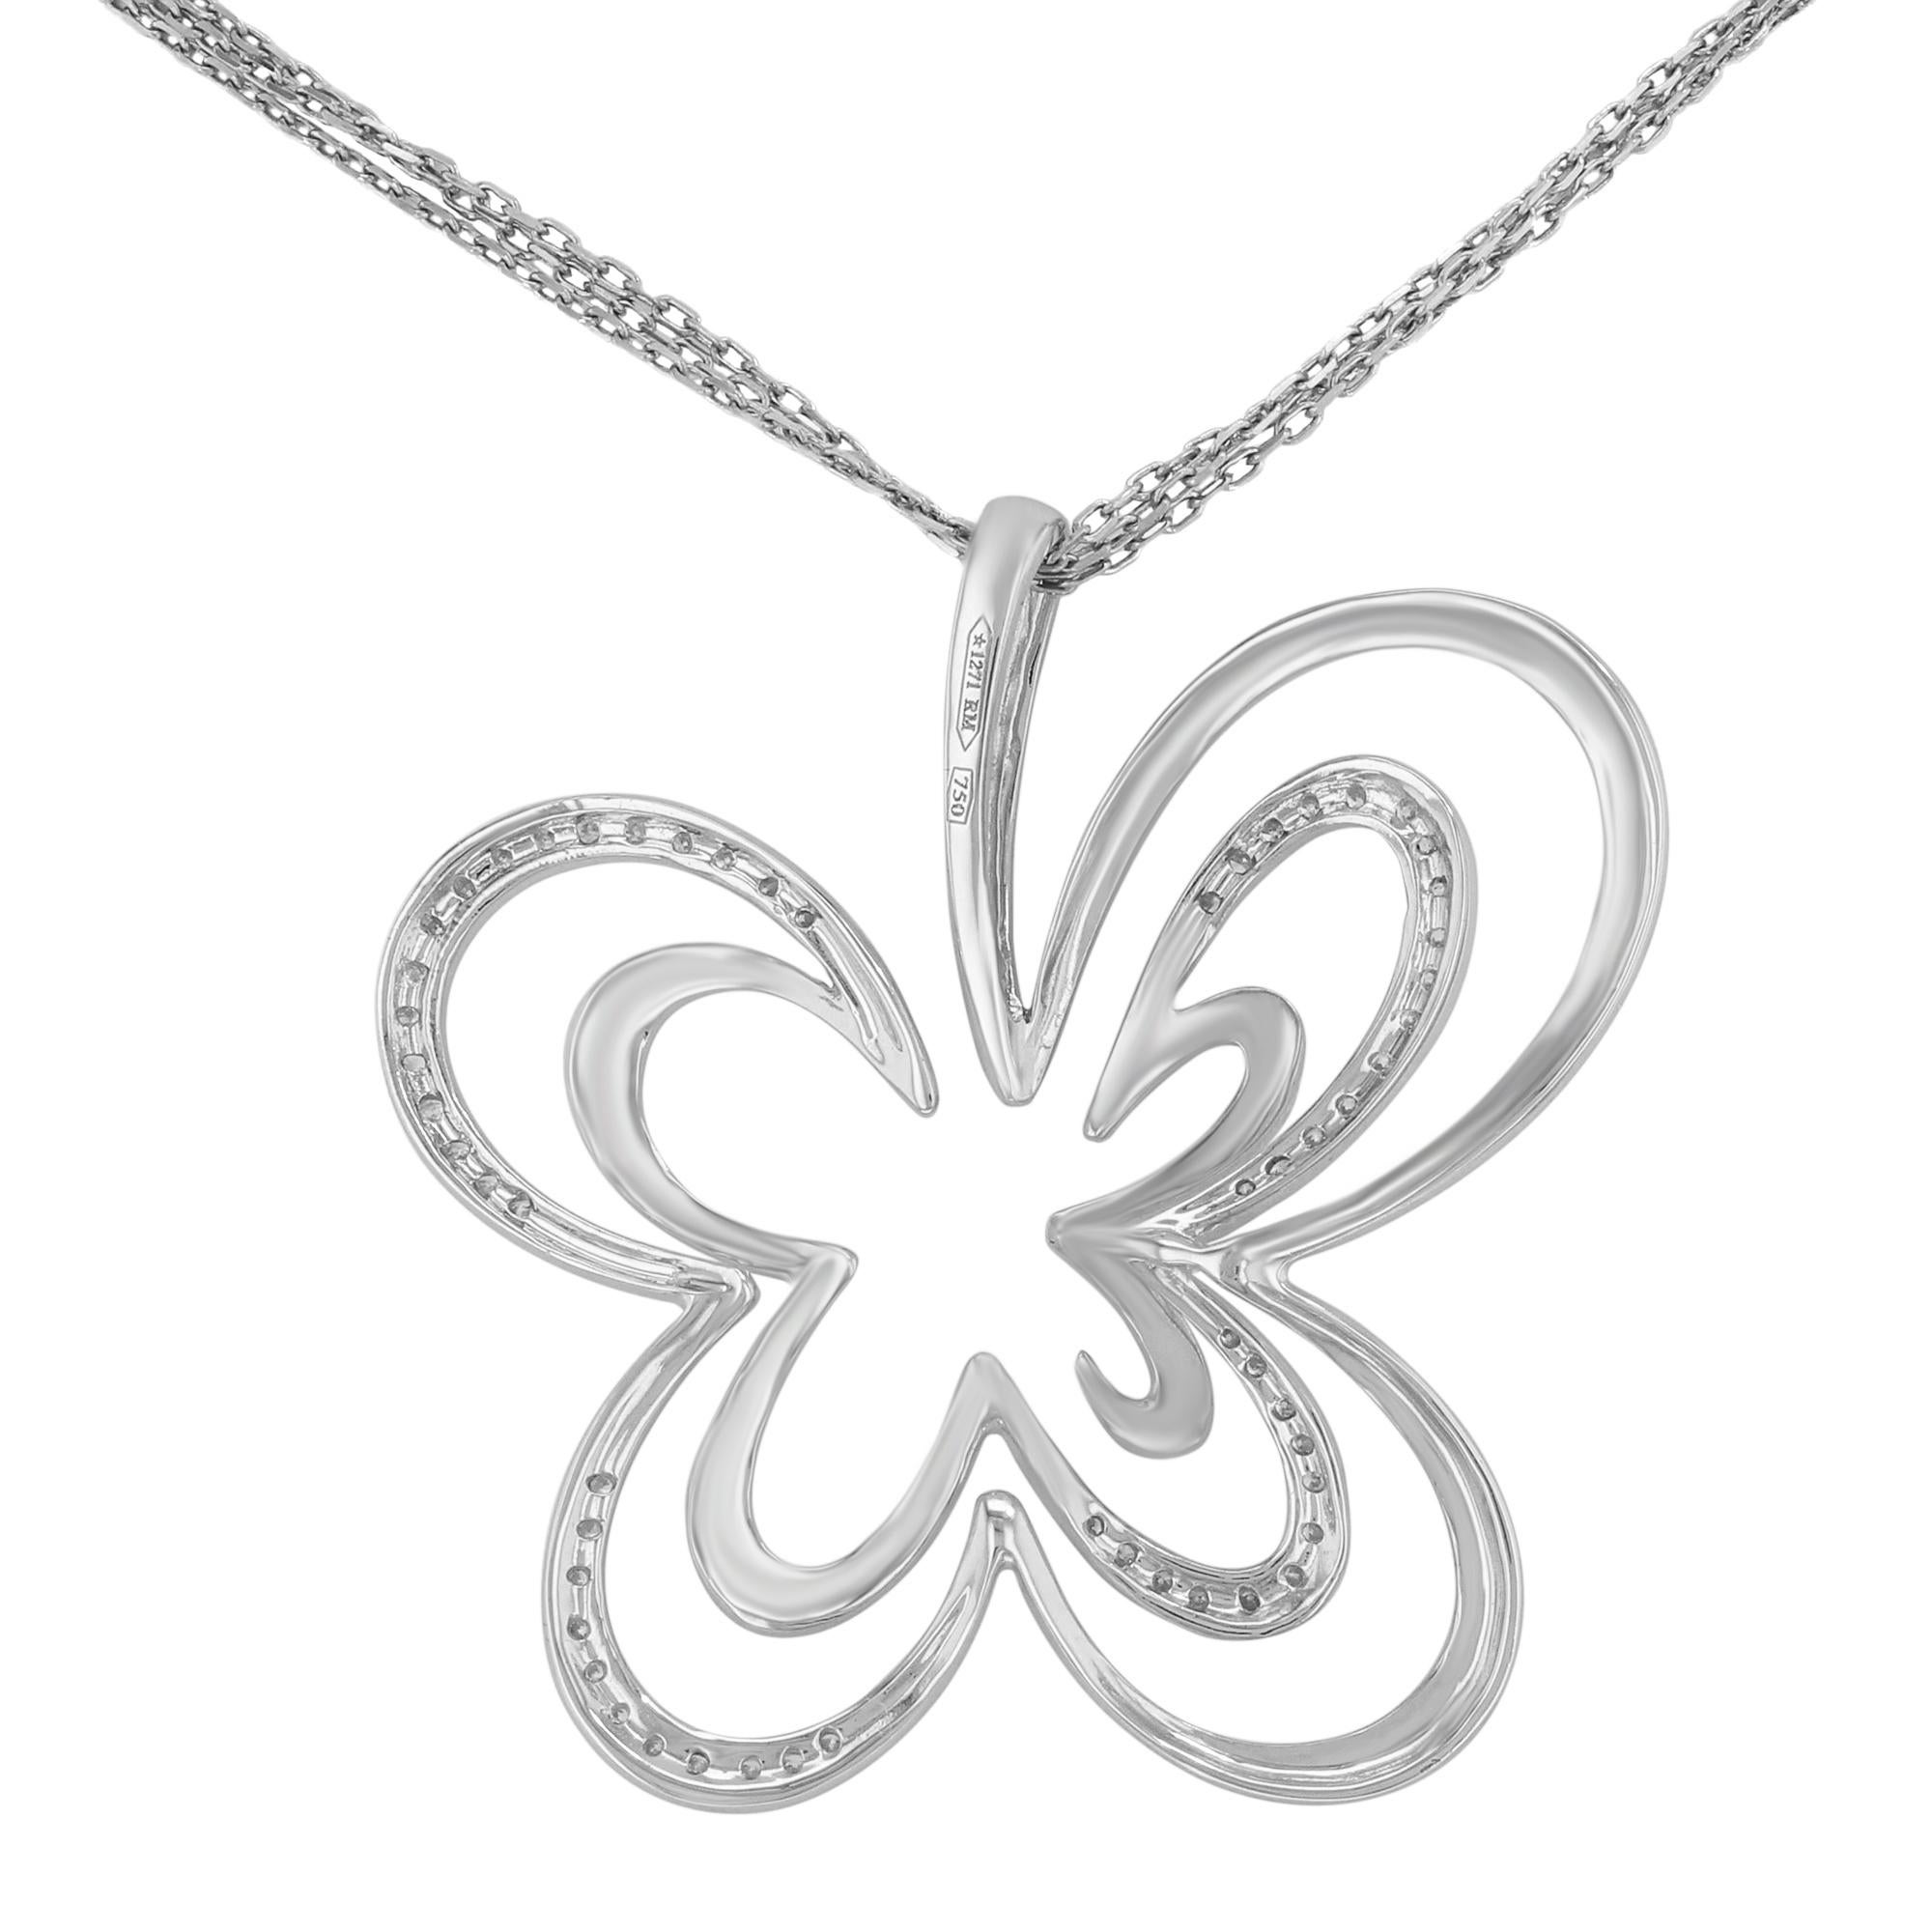 This necklace is made of 18k white gold and encrusted with 0.20 cttw diamonds. Length of the necklace is 16.25